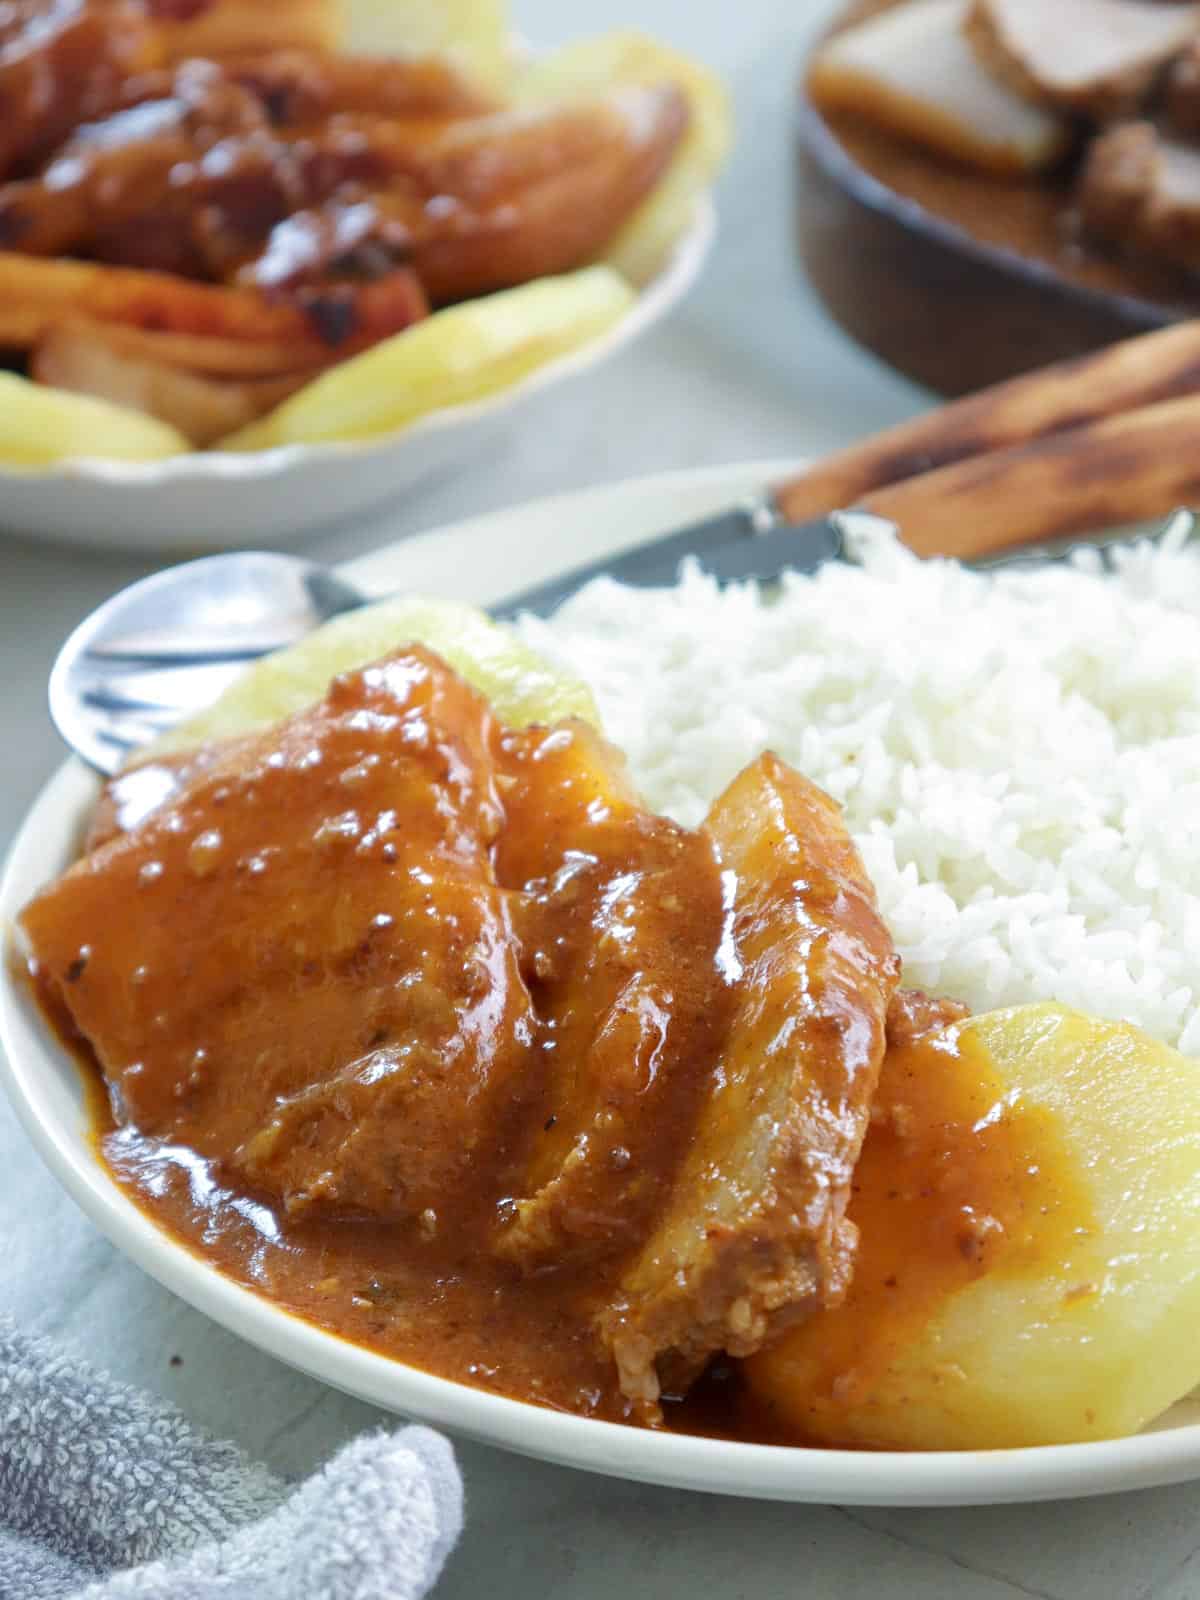 sliced pork asado, pan-fried potatoes and thick tomato gravy with steamed rice on a white plate